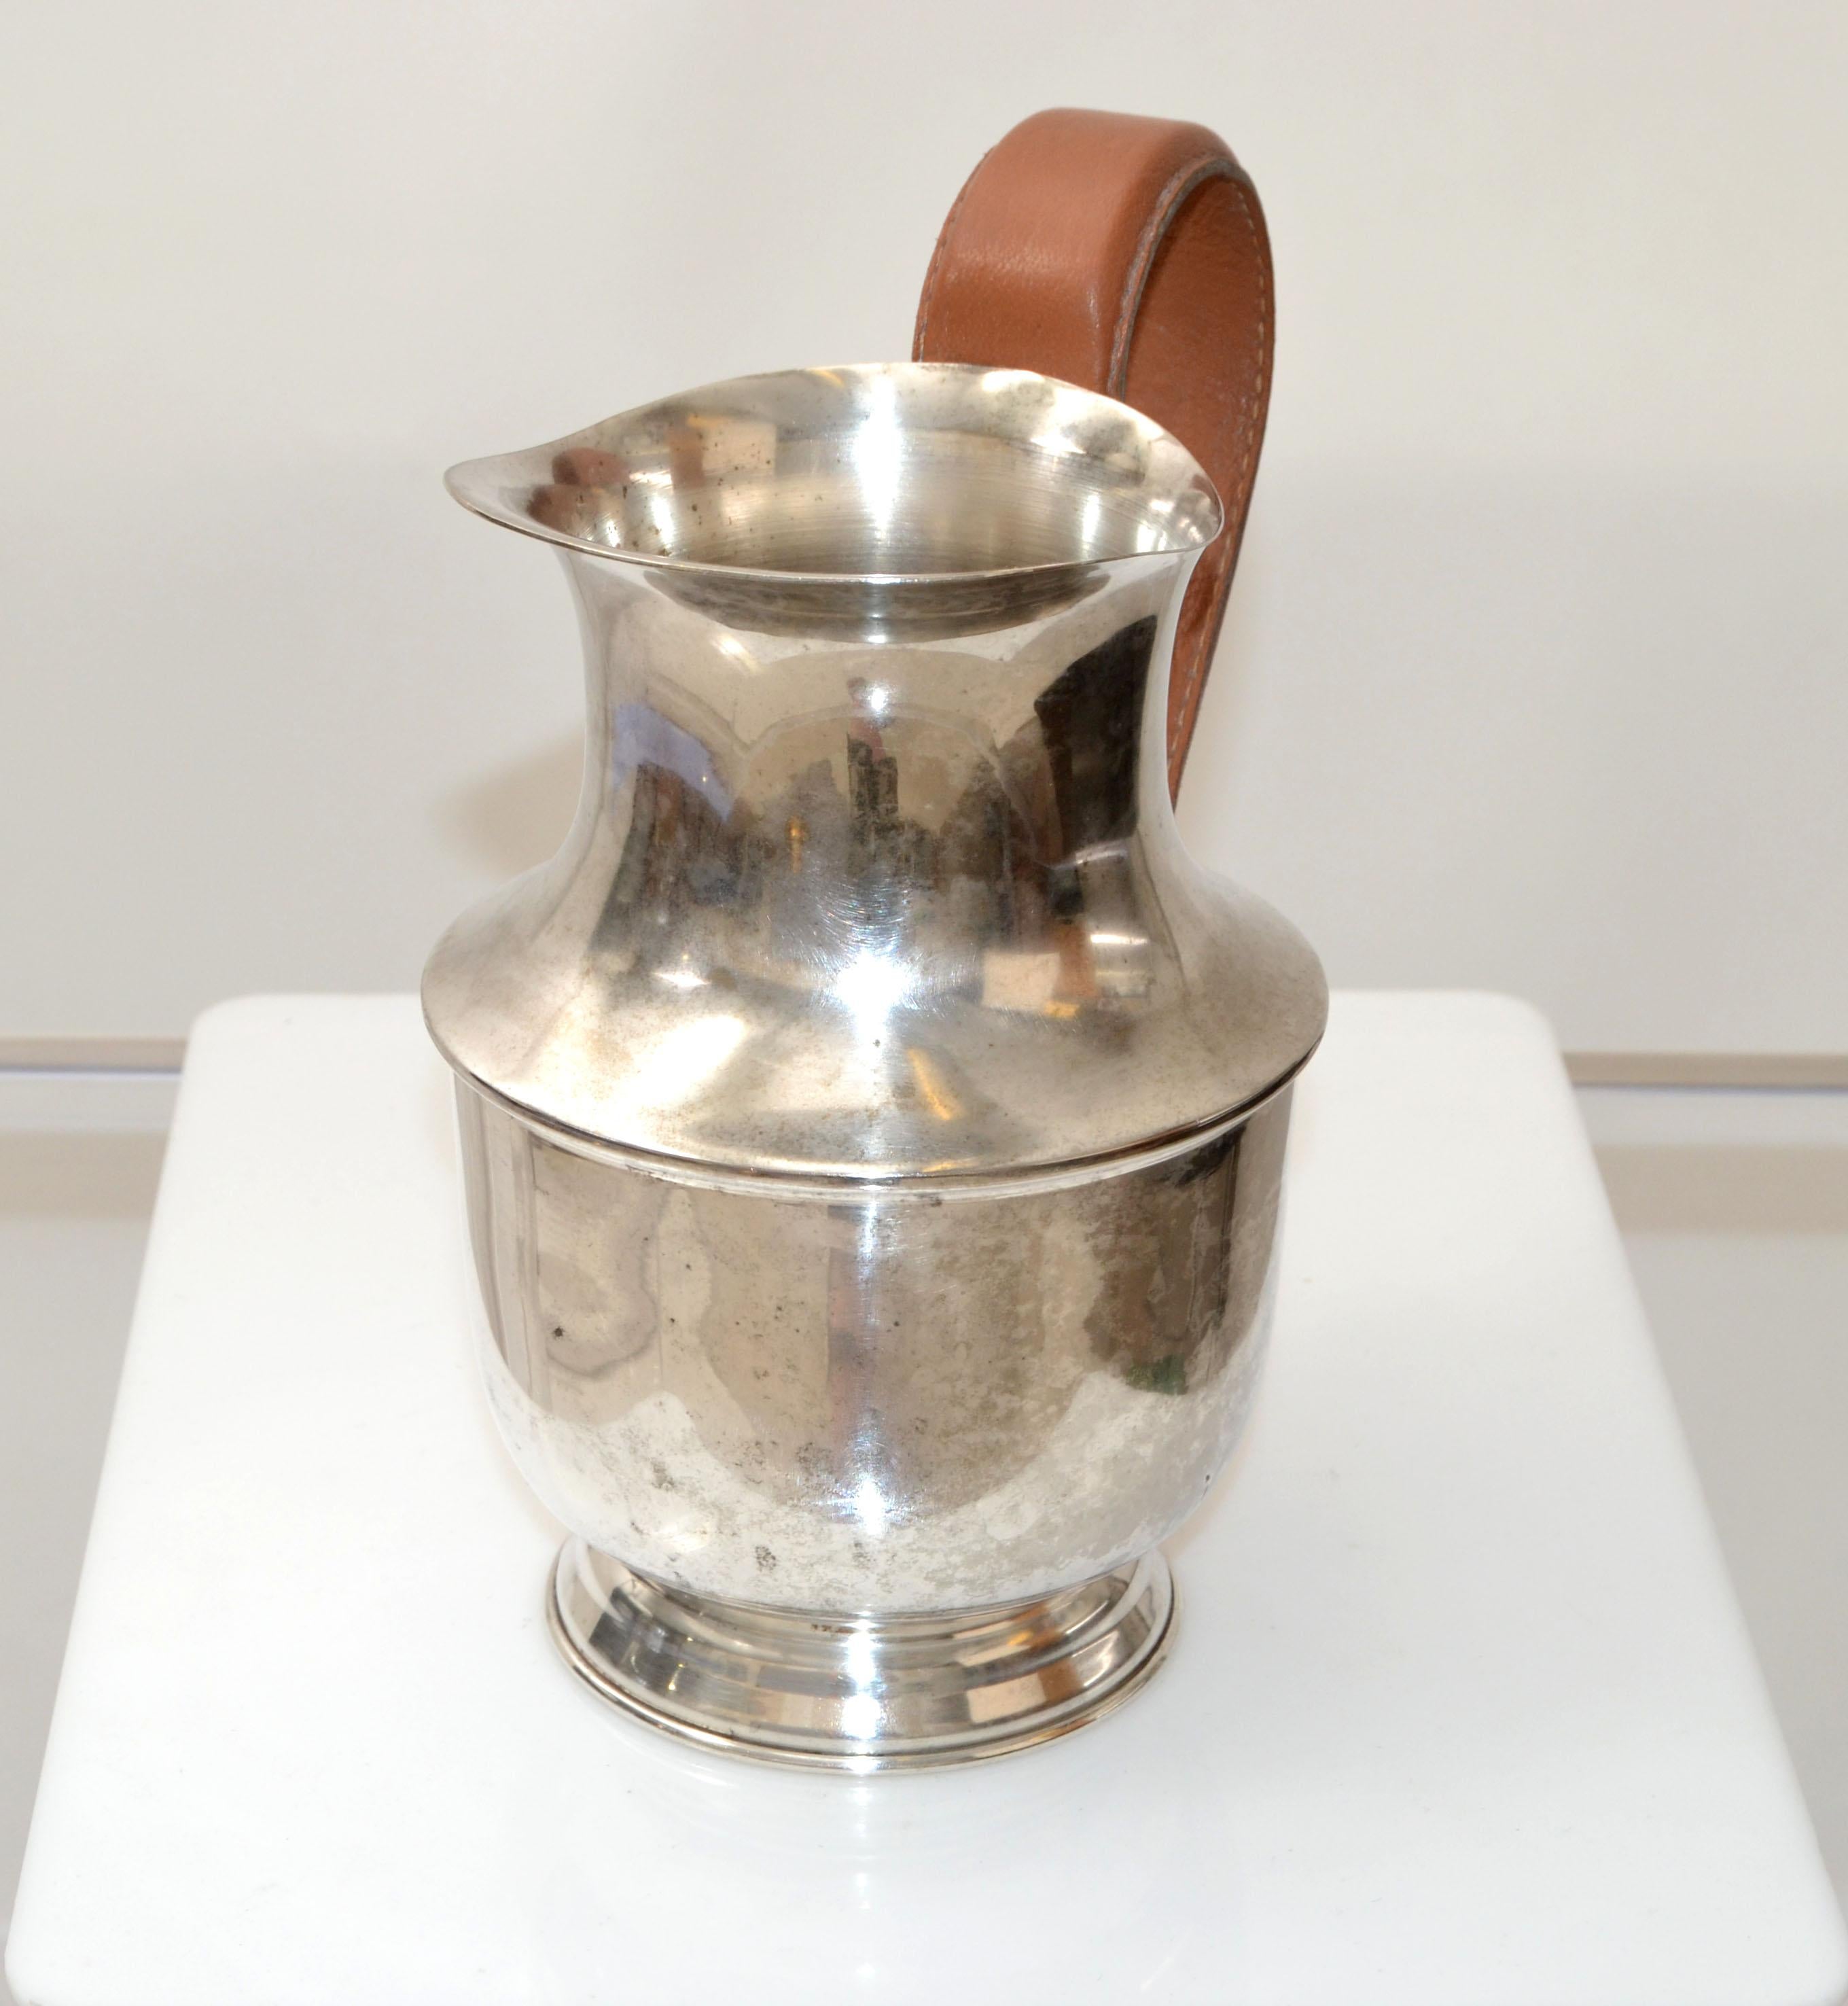 American Hermès Style Mid-Century Modern Silver Plate over Nickel Decanter, Vessel Carafe